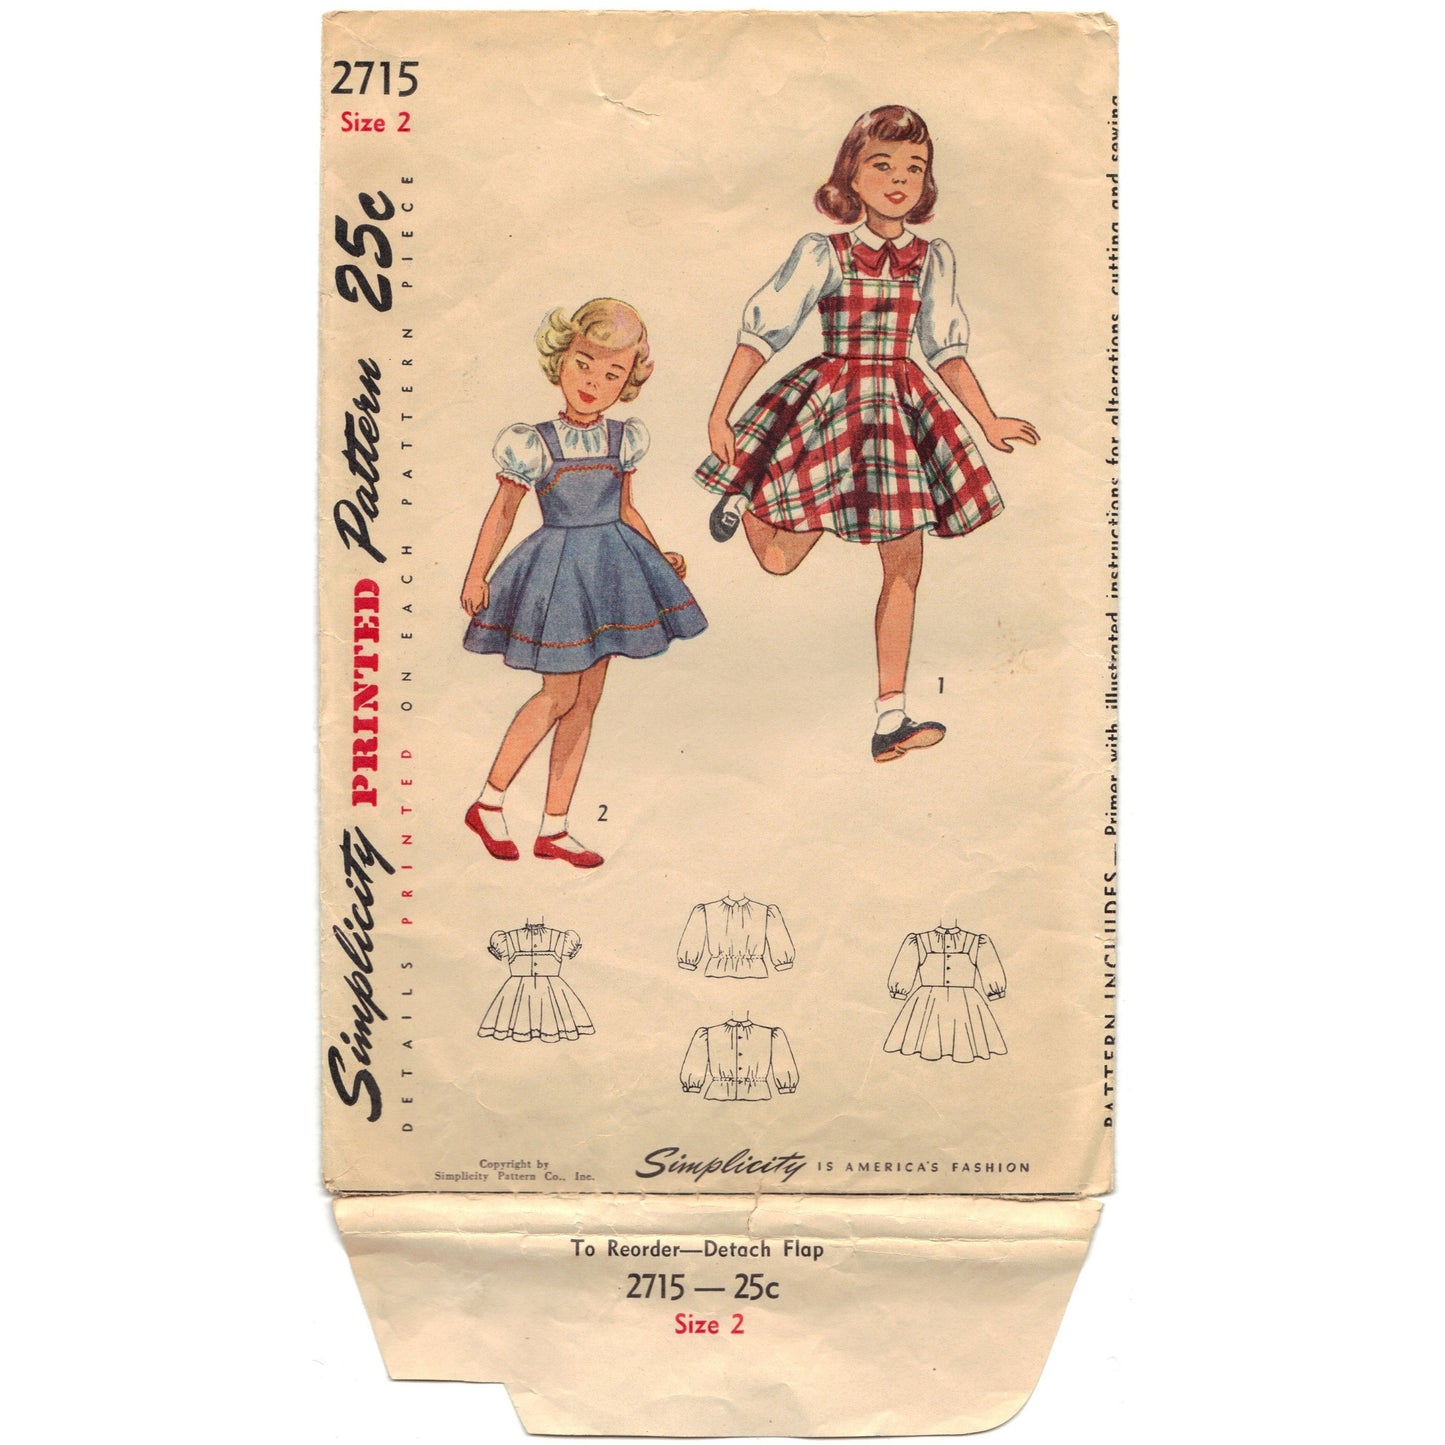 Simplicity 2715 Pattern Vintage Child Jumper and Blouse